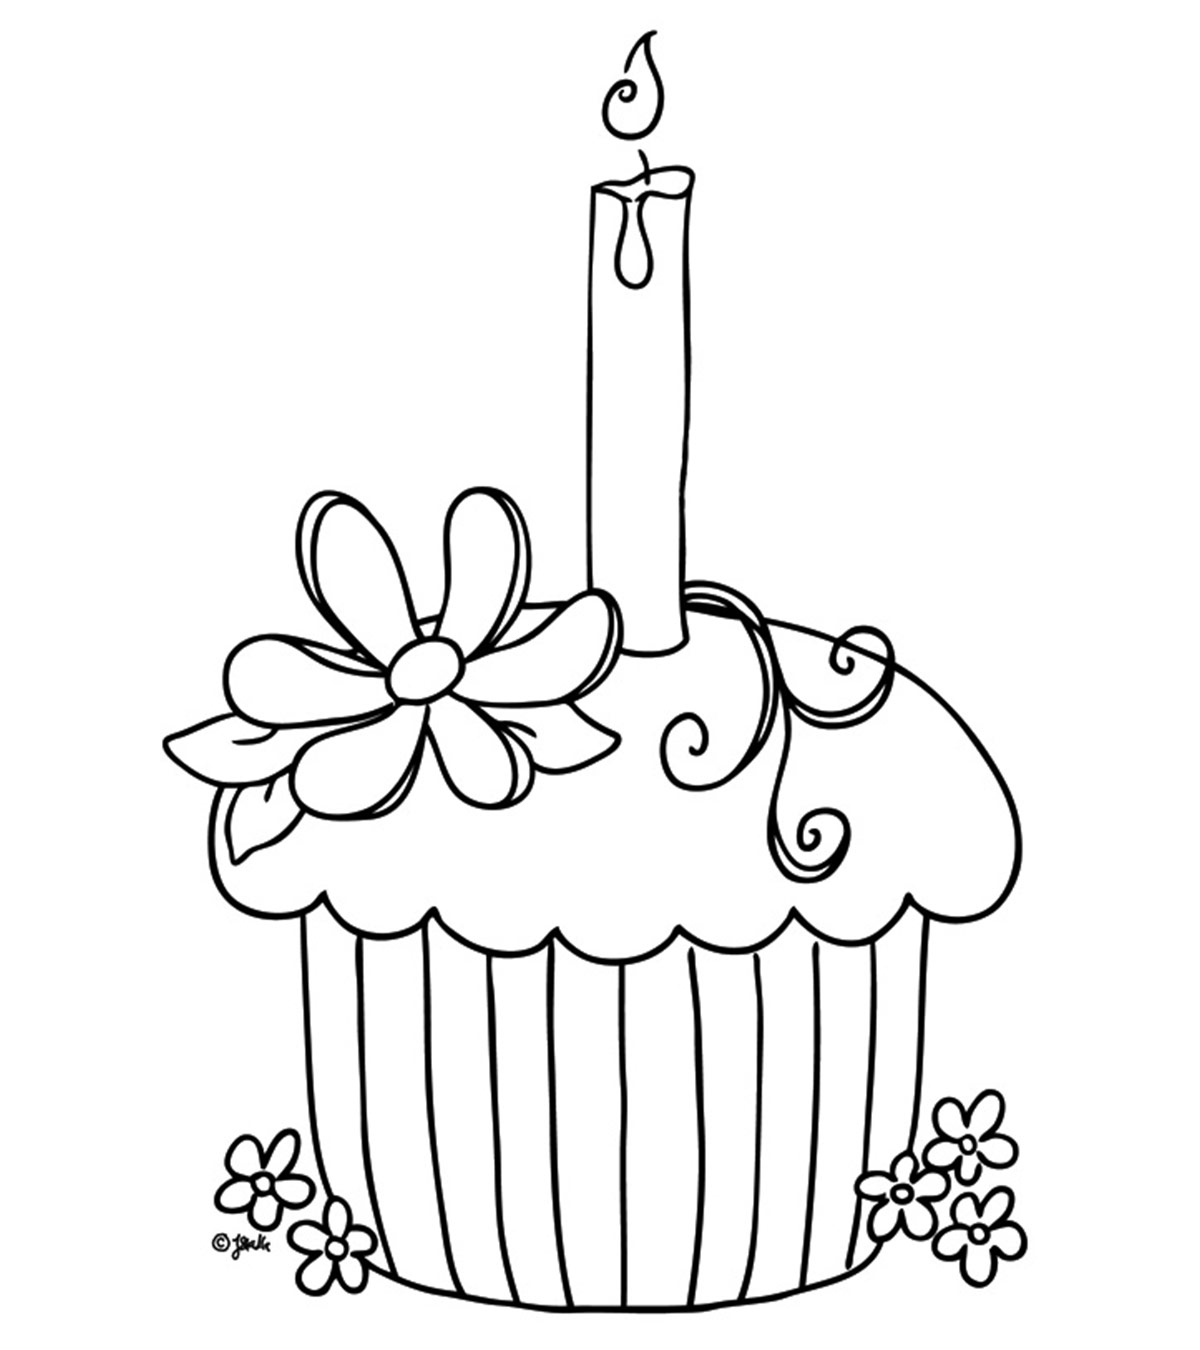 25 Lovely Cupcake Coloring Pages Your Toddler Will Love